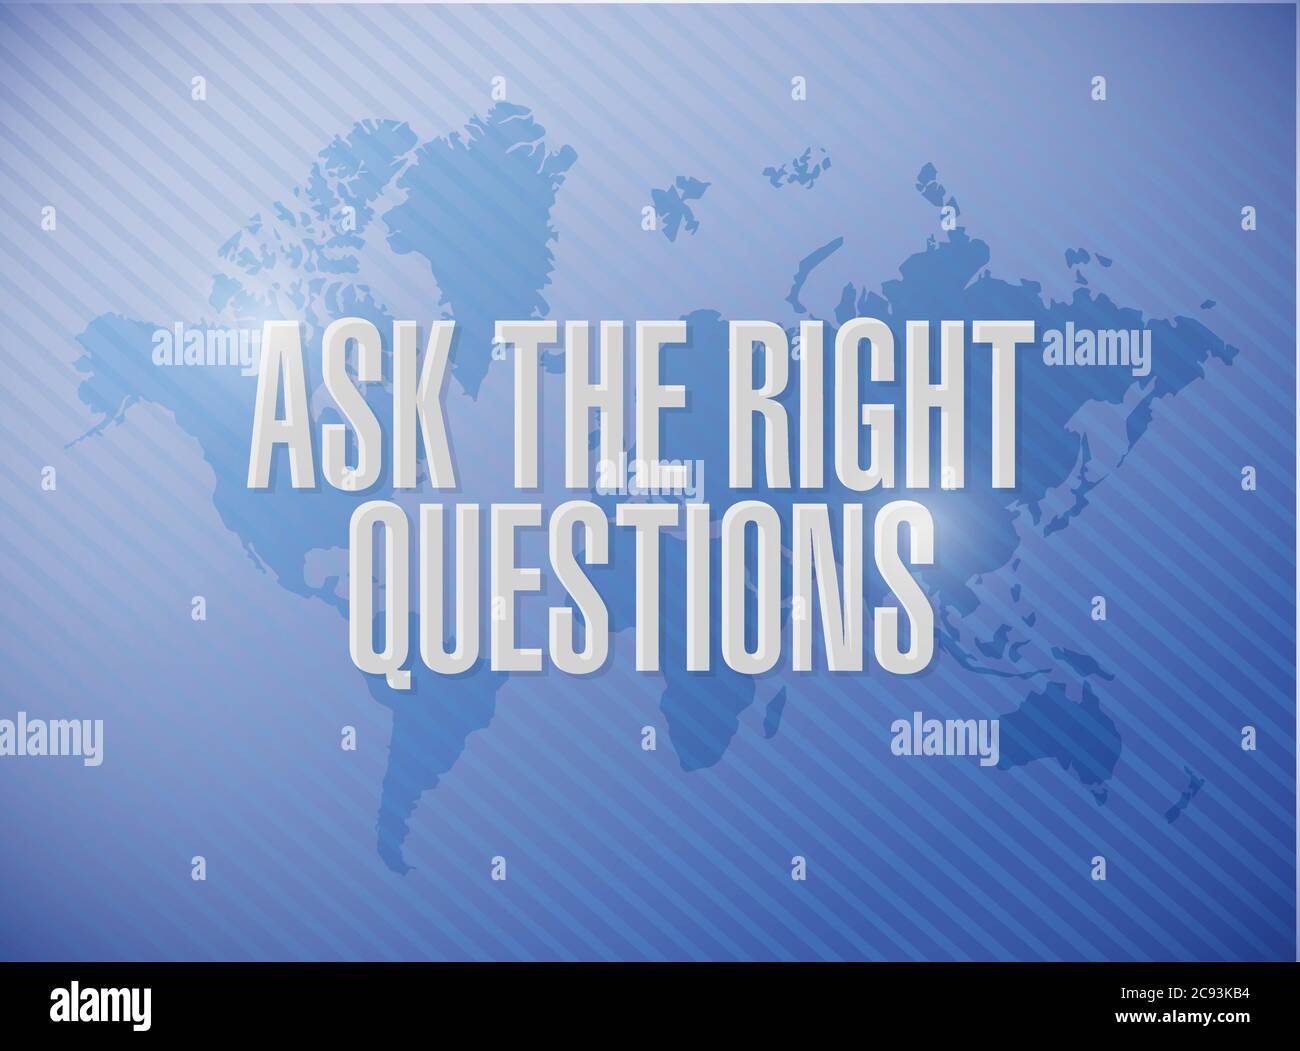 Ask the right questions sign illustration design over a world map background Stock Vector